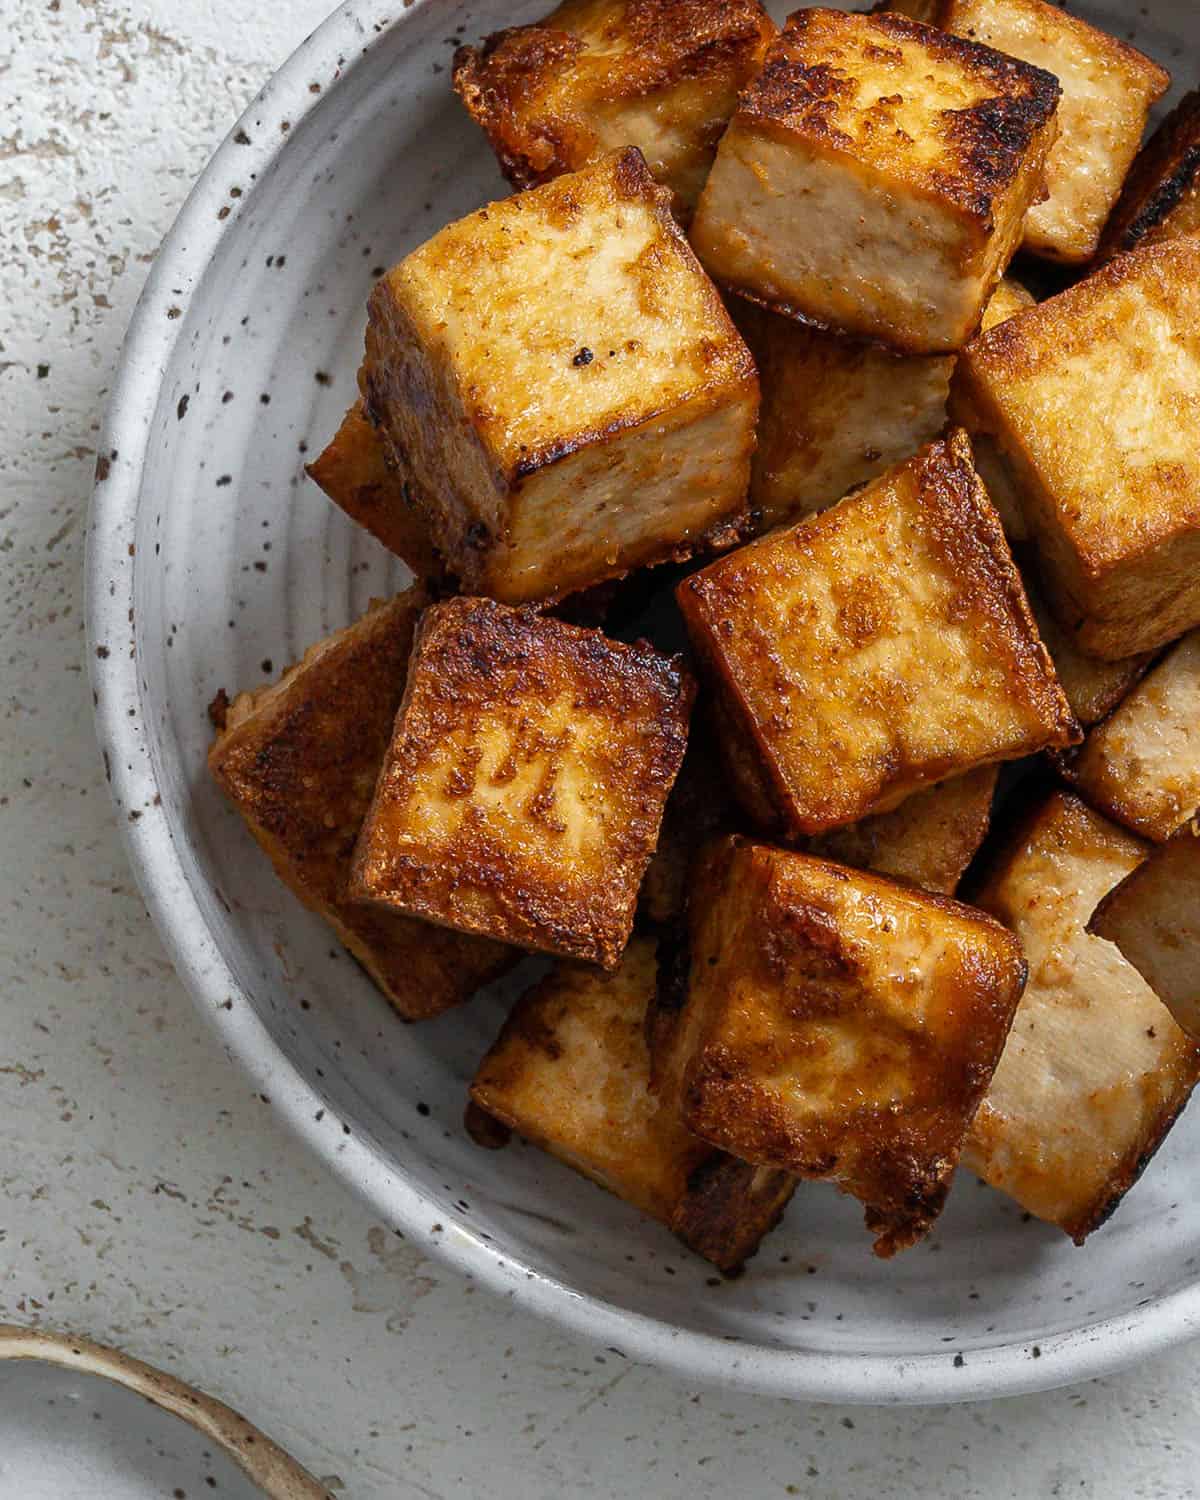 Pan fried tofu in a white speckled bowl on a textured white surface.